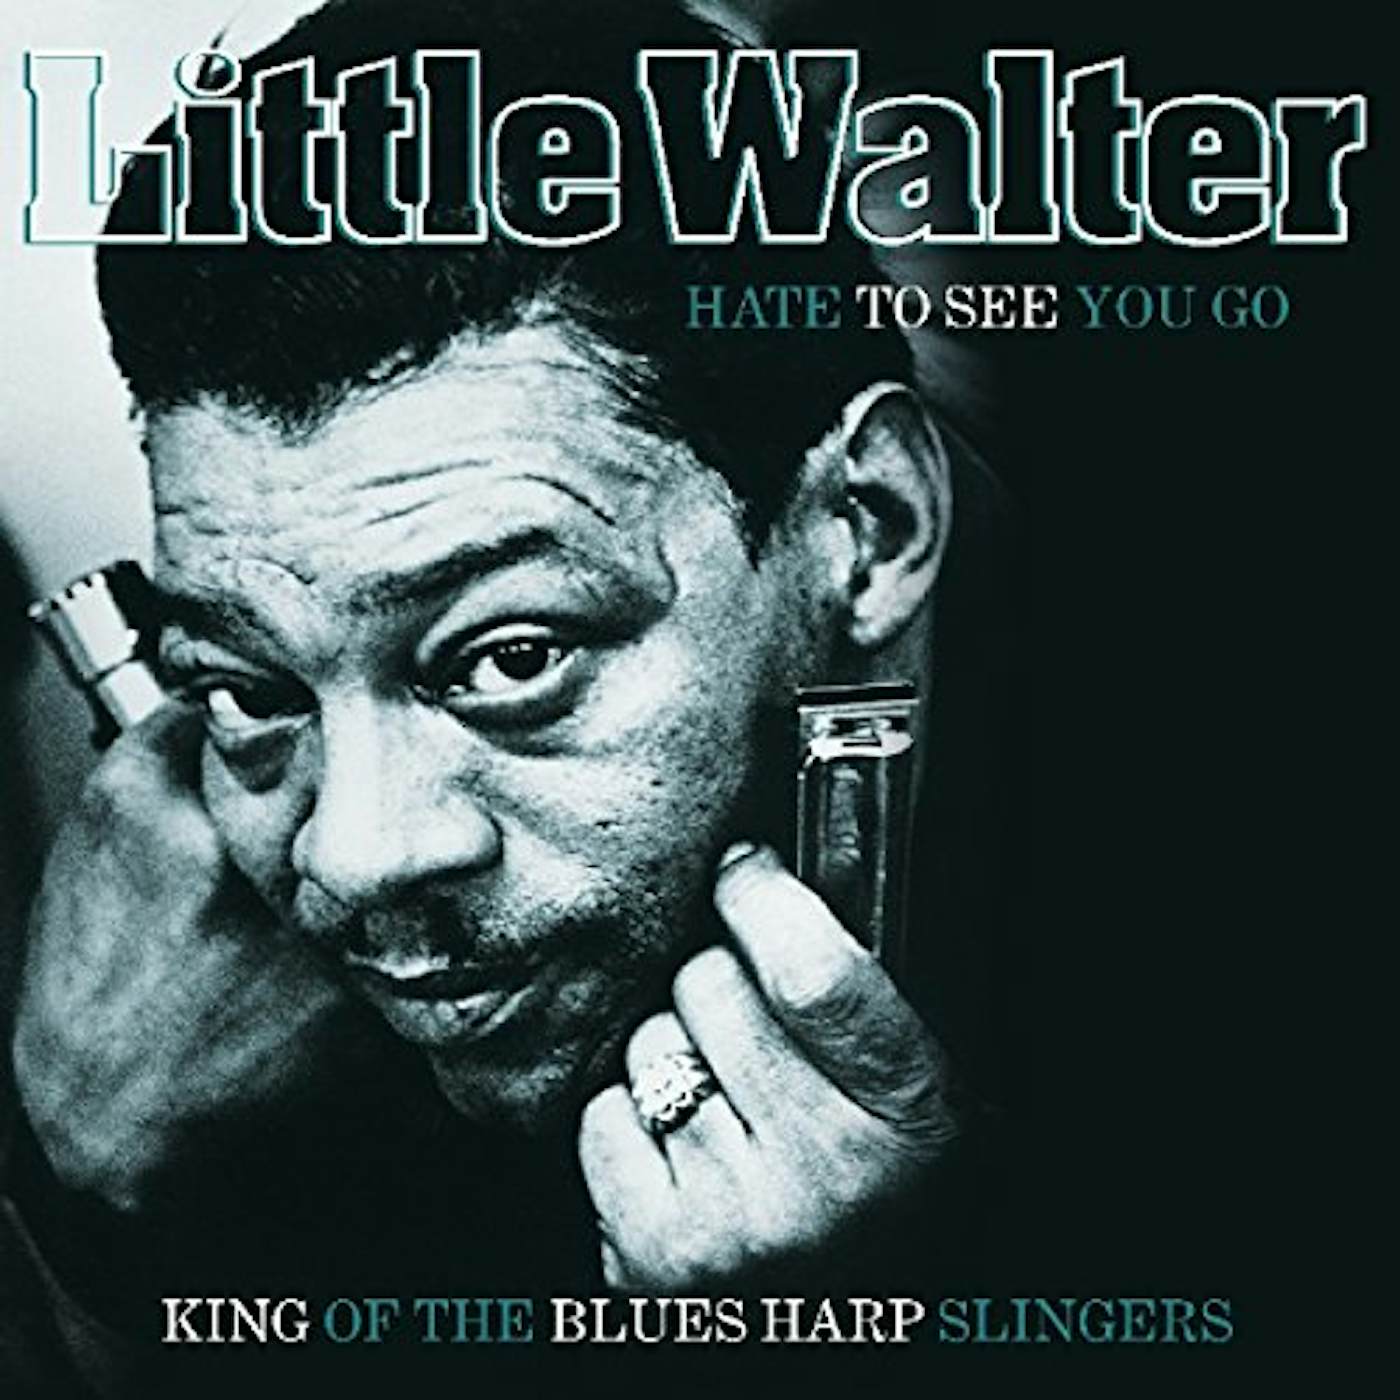 Little Walter HATE TO SEE YOU GO - KING OF THE BLUES HARP SLINGERS (180G) Vinyl Record